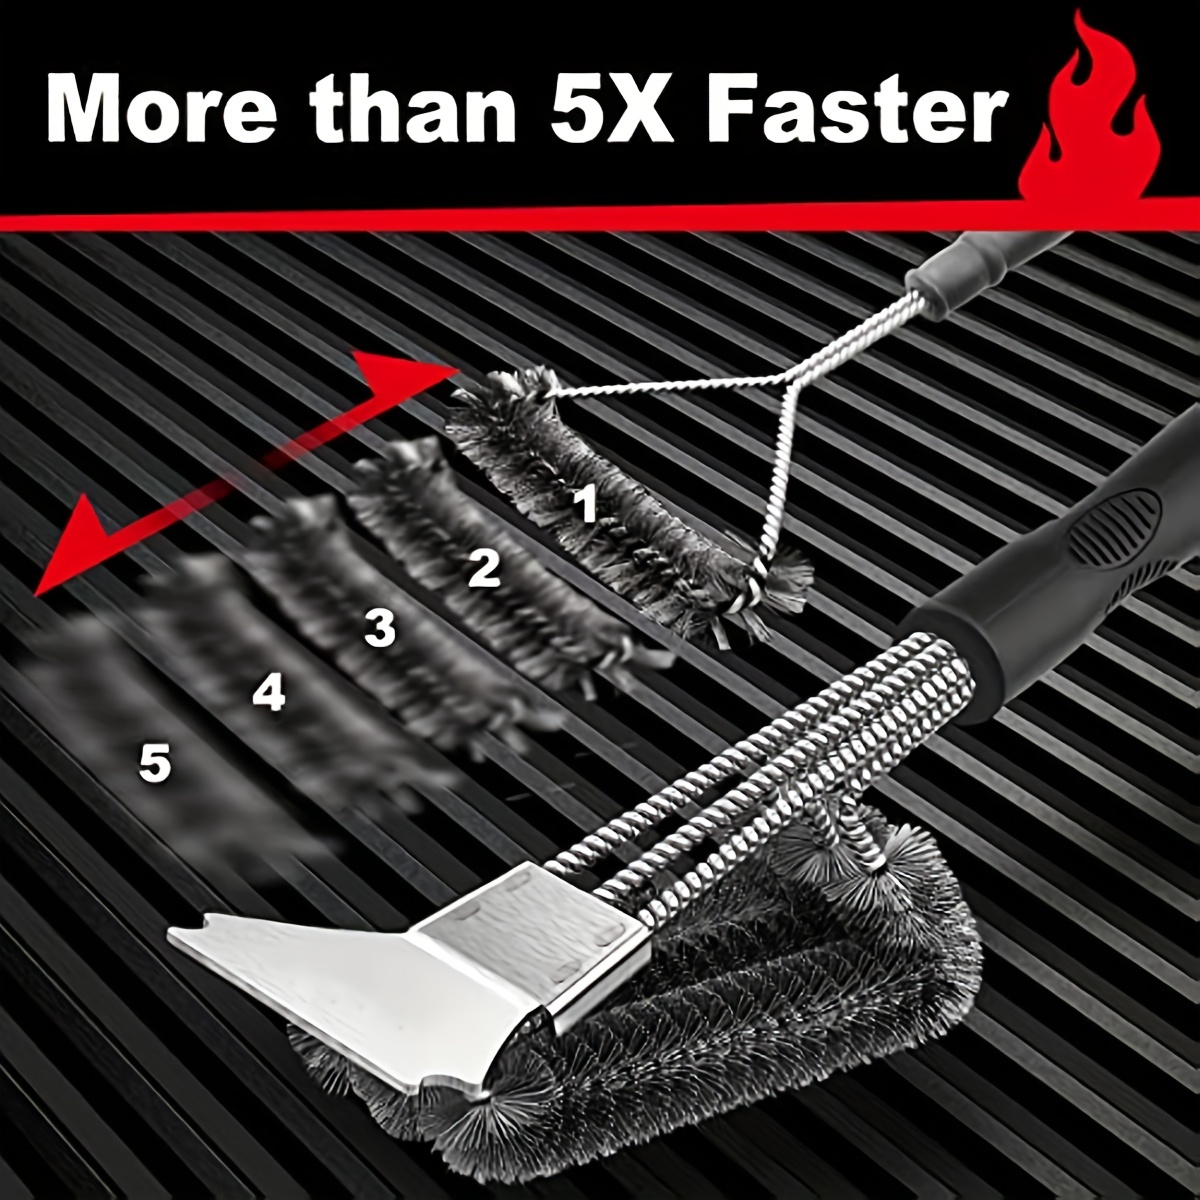 Grillart Grill Brush Bristle Free & Wire Combined BBQ Brush - Safe & Efficient Grill Cleaning Brush- 17 Grill Cleaner Brush for Gas/Porcelain